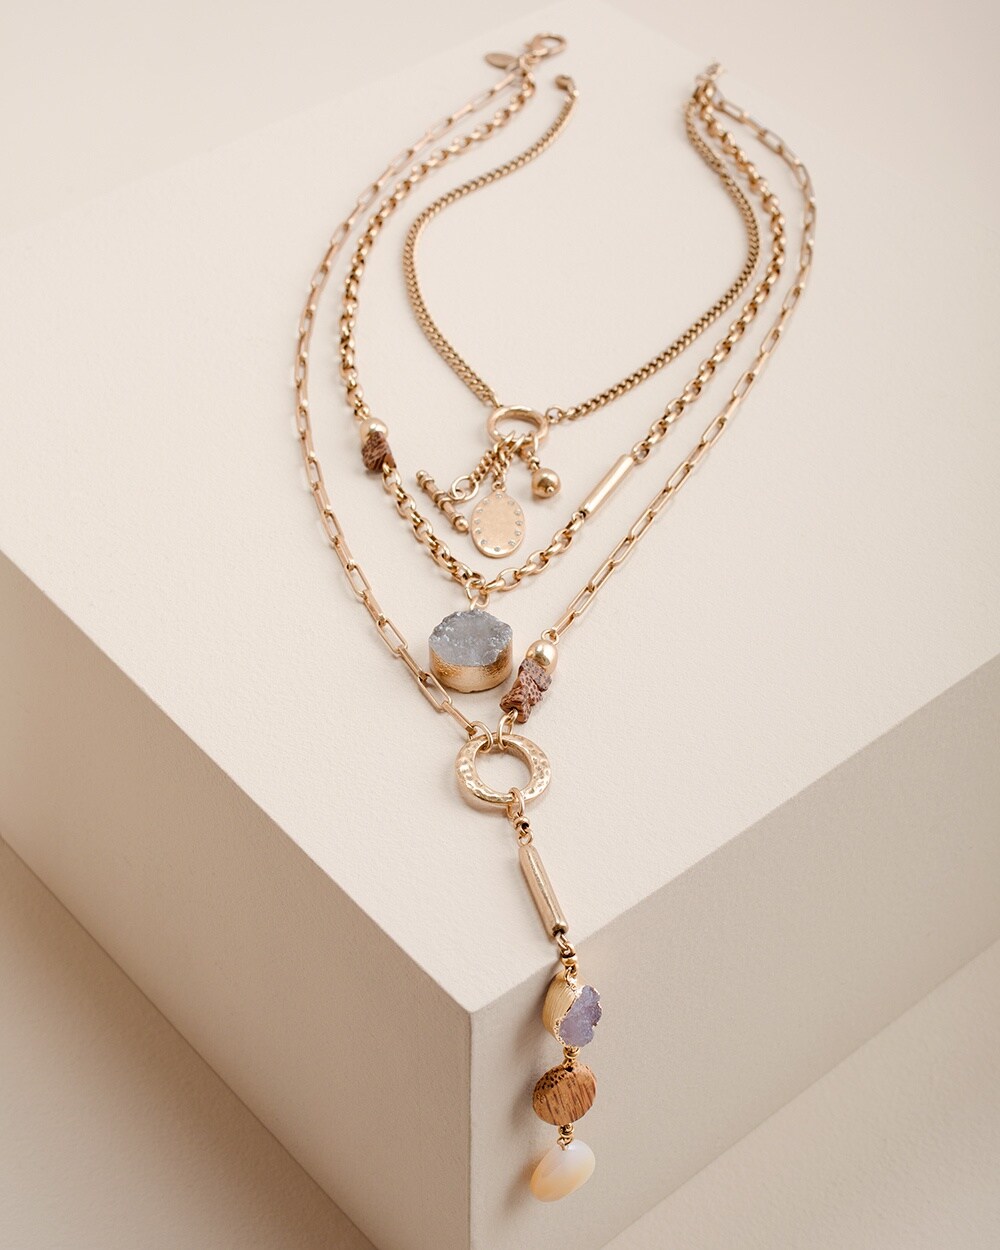 Goldtone and Neutral Convertible Layering Necklace